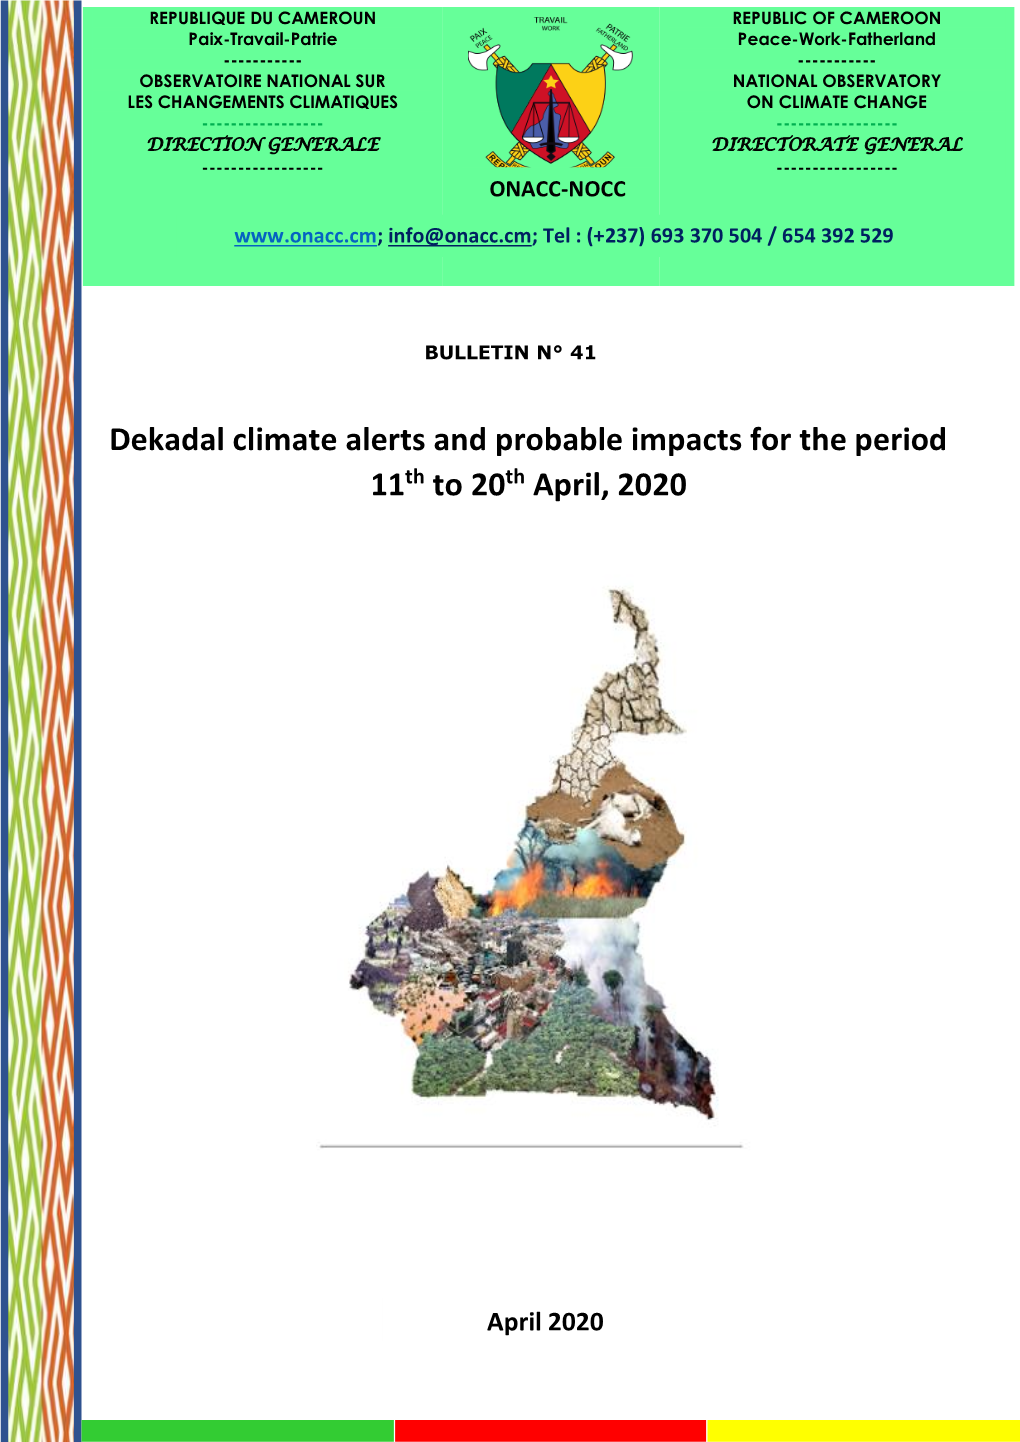 Dekadal Climate Alerts and Probable Impacts for the Period 11Th to 20Th April, 2020